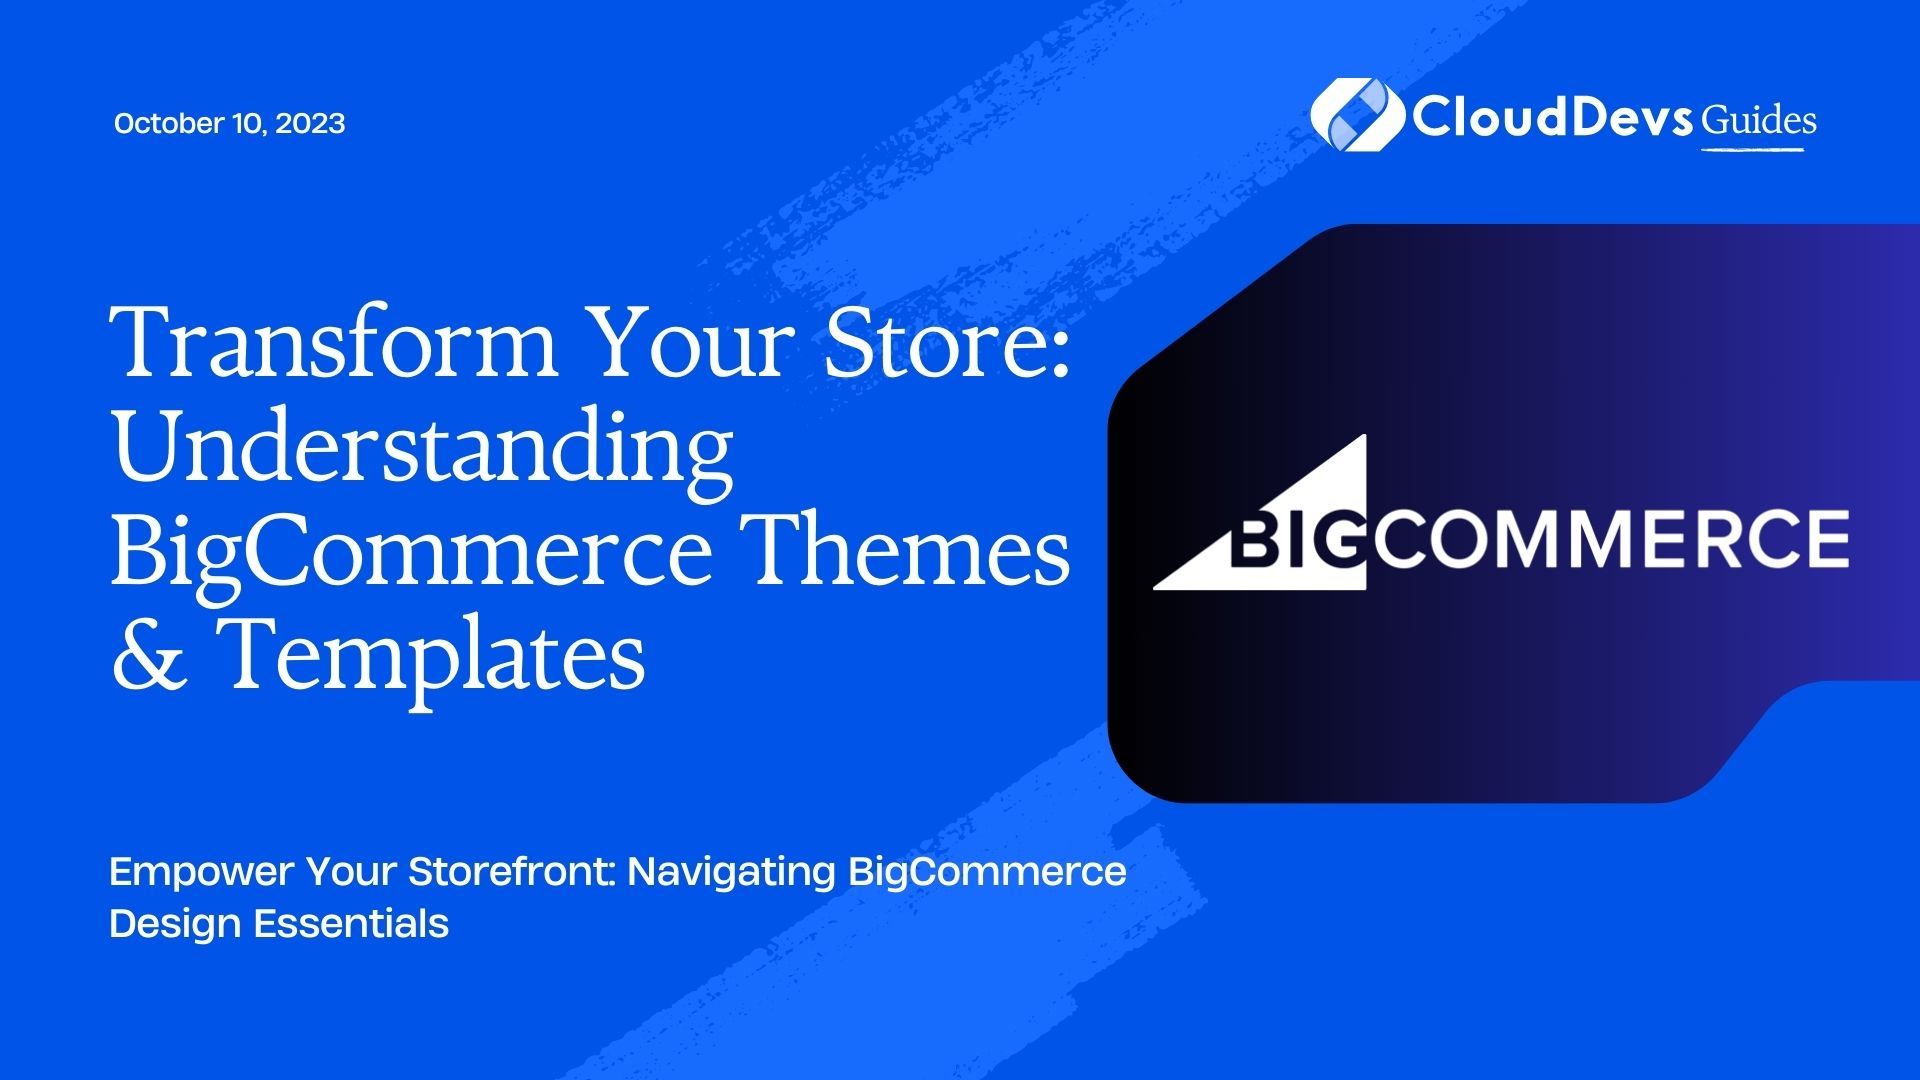 Transform Your Store: Understanding BigCommerce Themes & Templates